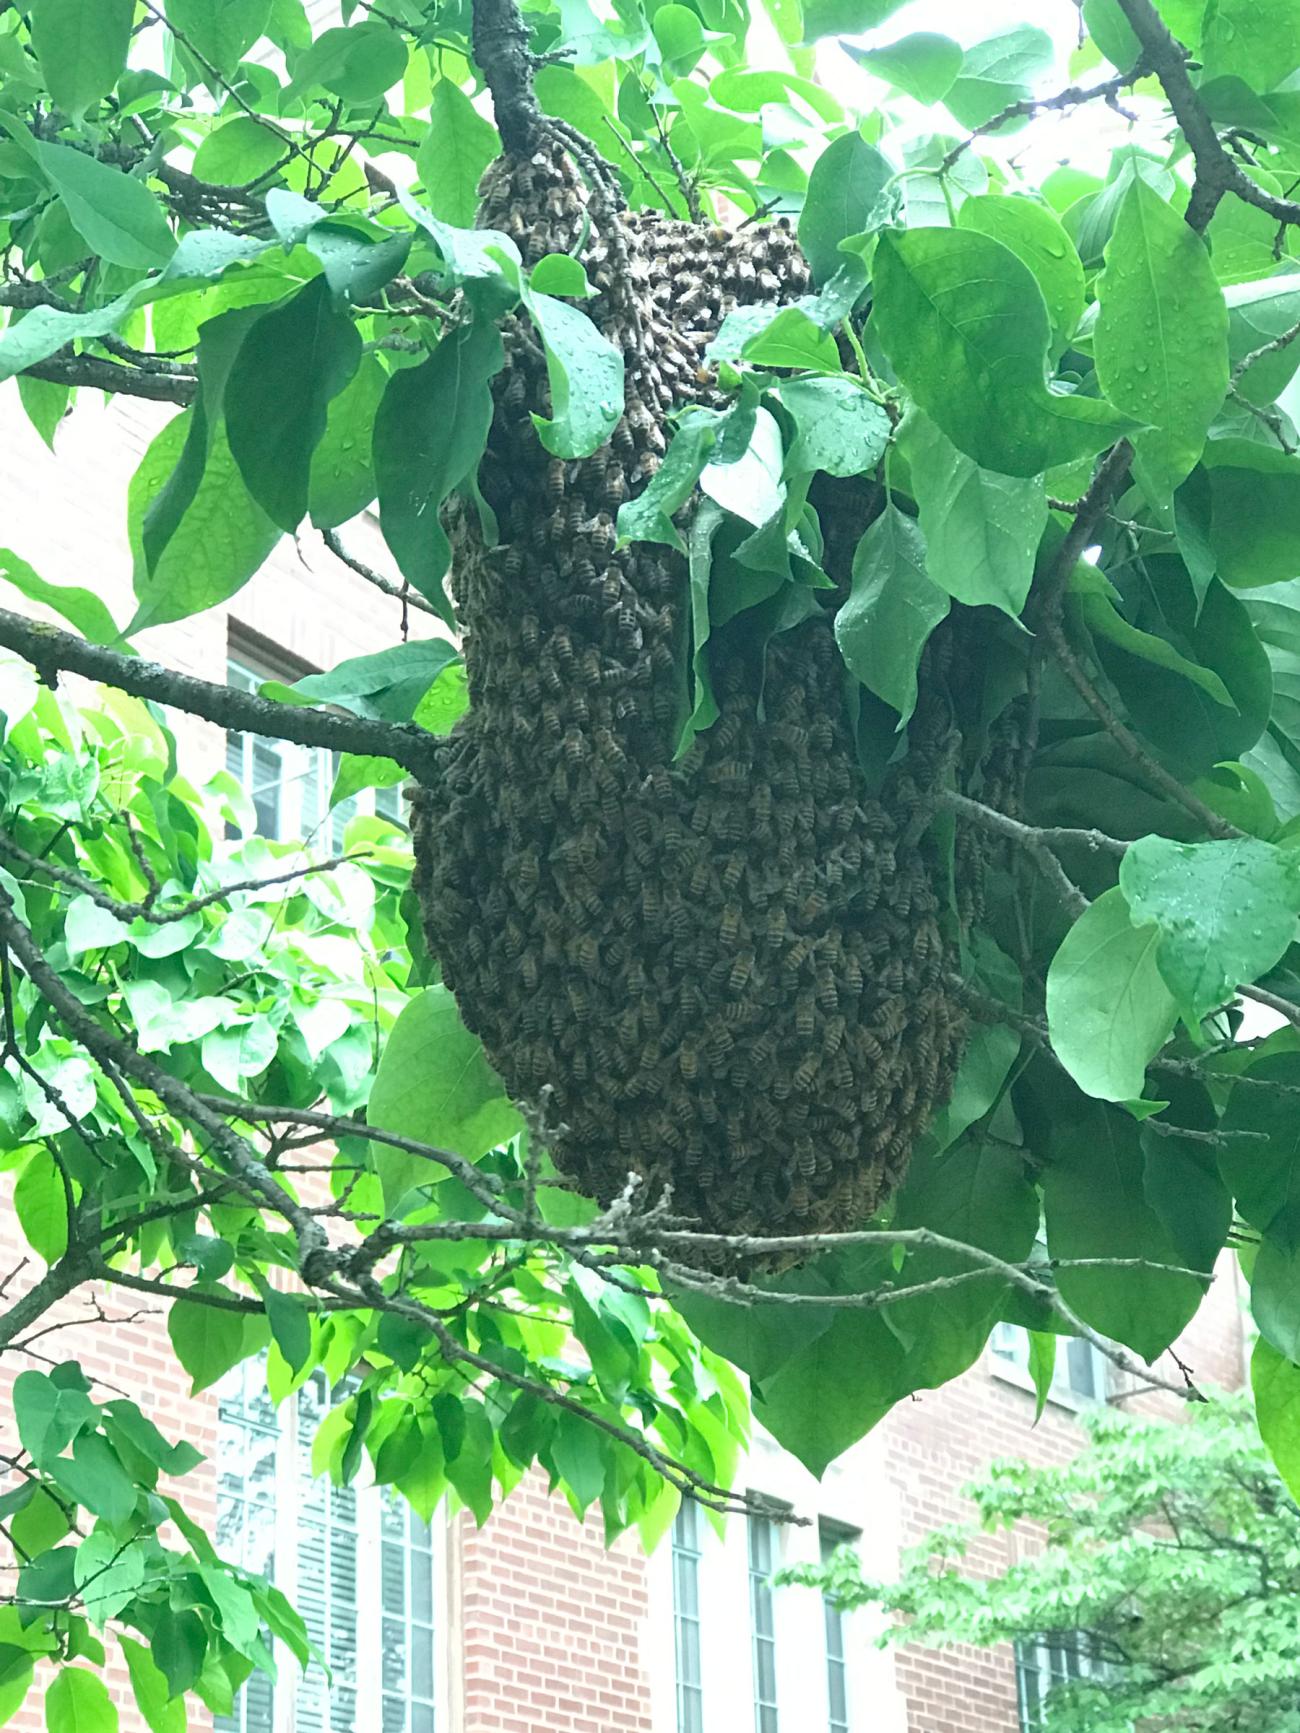 A swarm of bees gathered on the branch of a tree